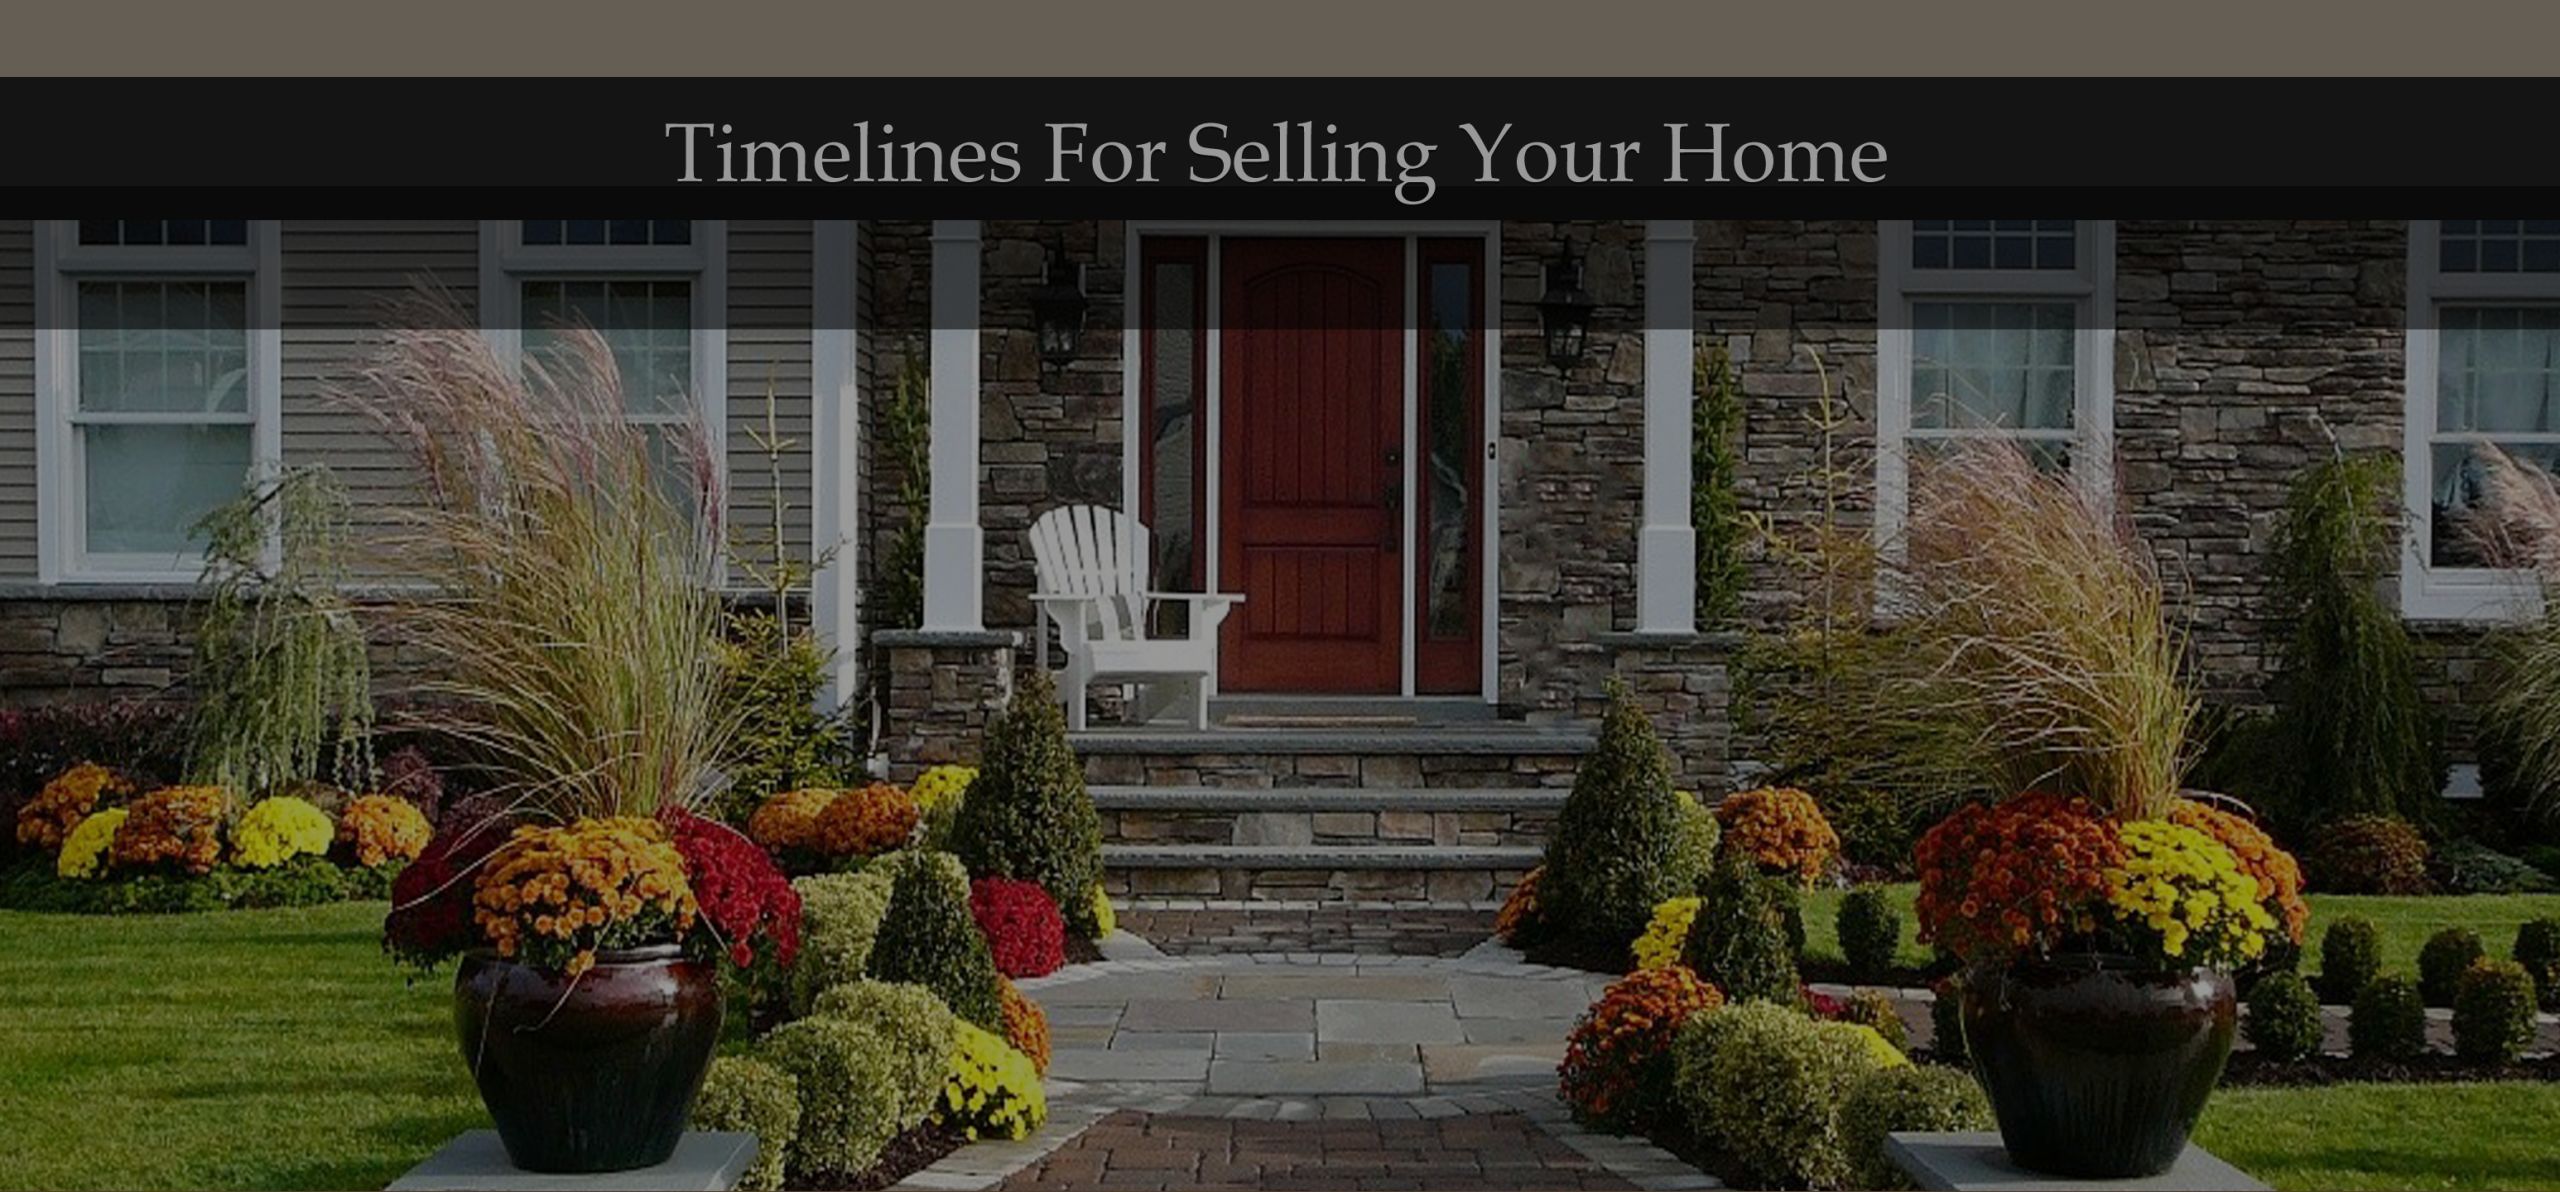 Top 11 Tips and the Timeline for Selling Your Home